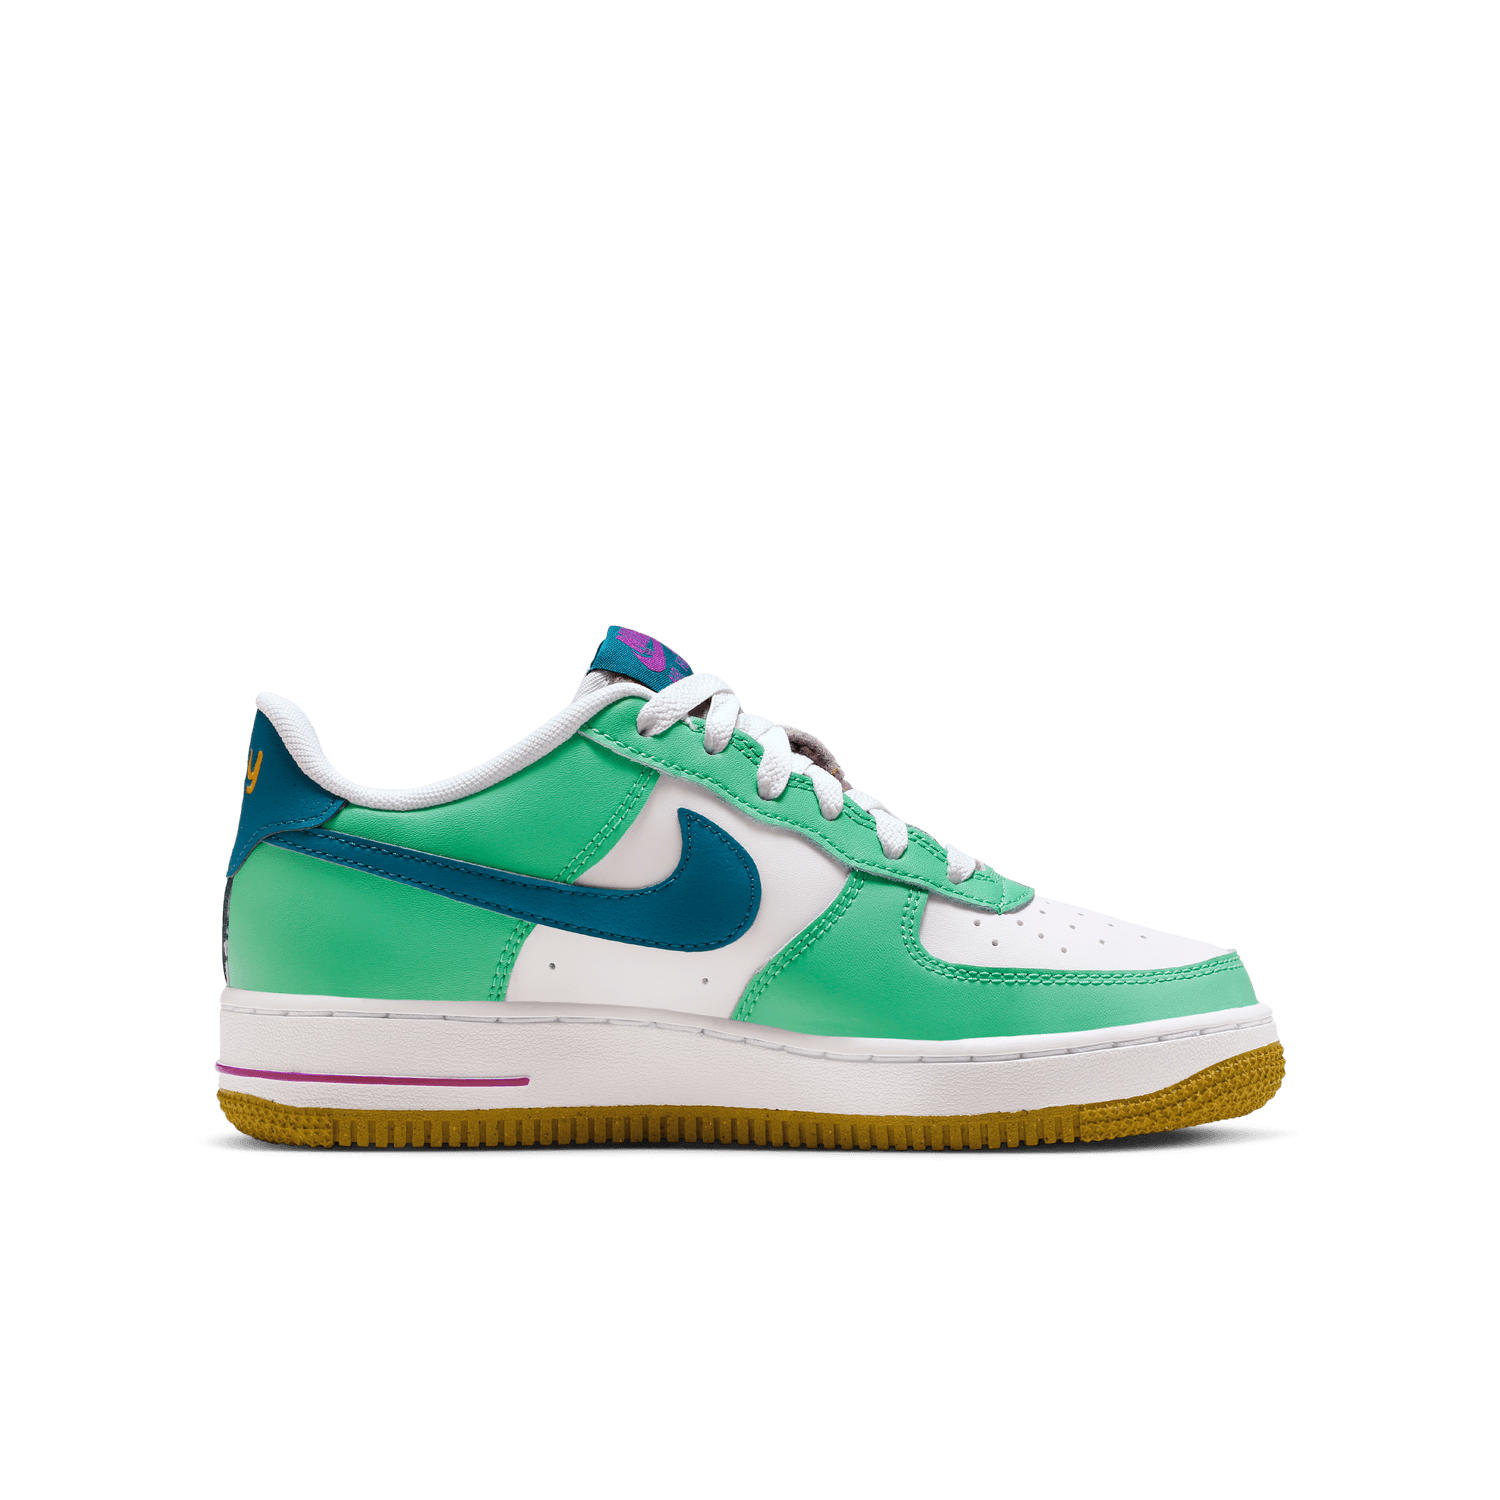 AIR FORCE 1 HIGH LV8 3 (GS) BIG KIDS US SIZE - 6.5 Y